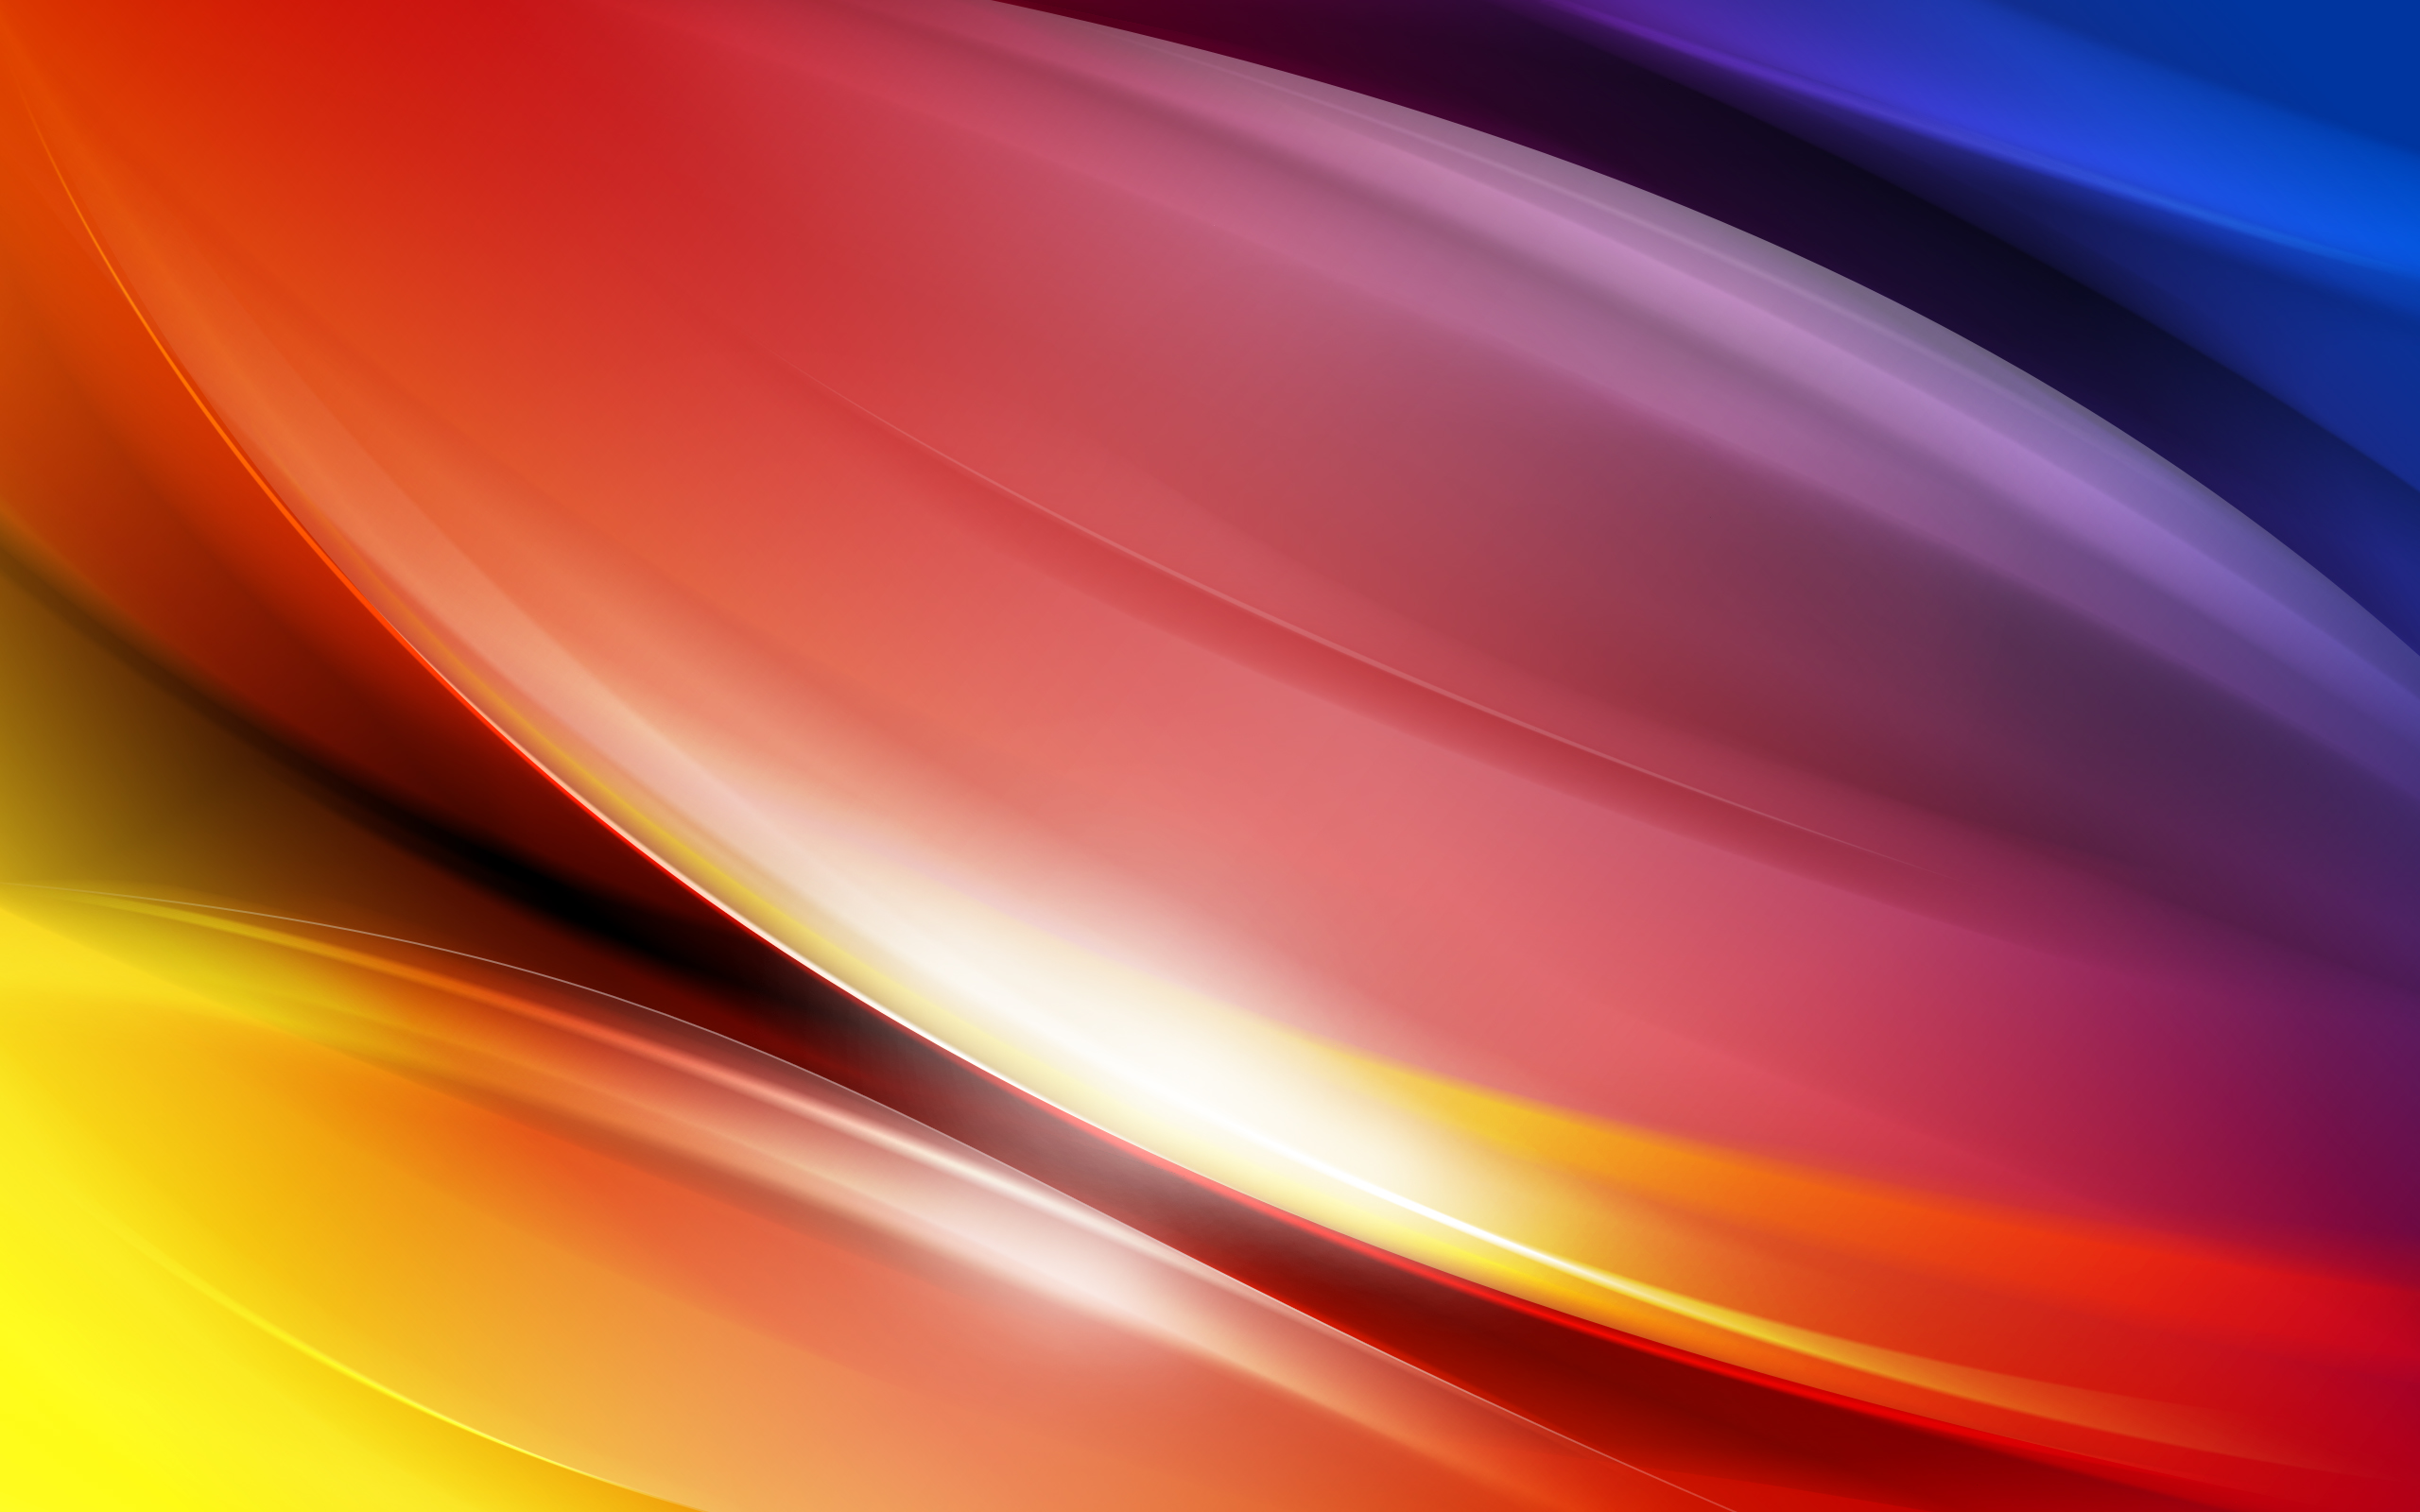 Vibrant abstract spectrum of colors - orange, red, and blue - creating a beautiful and eye-catching desktop wallpaper.